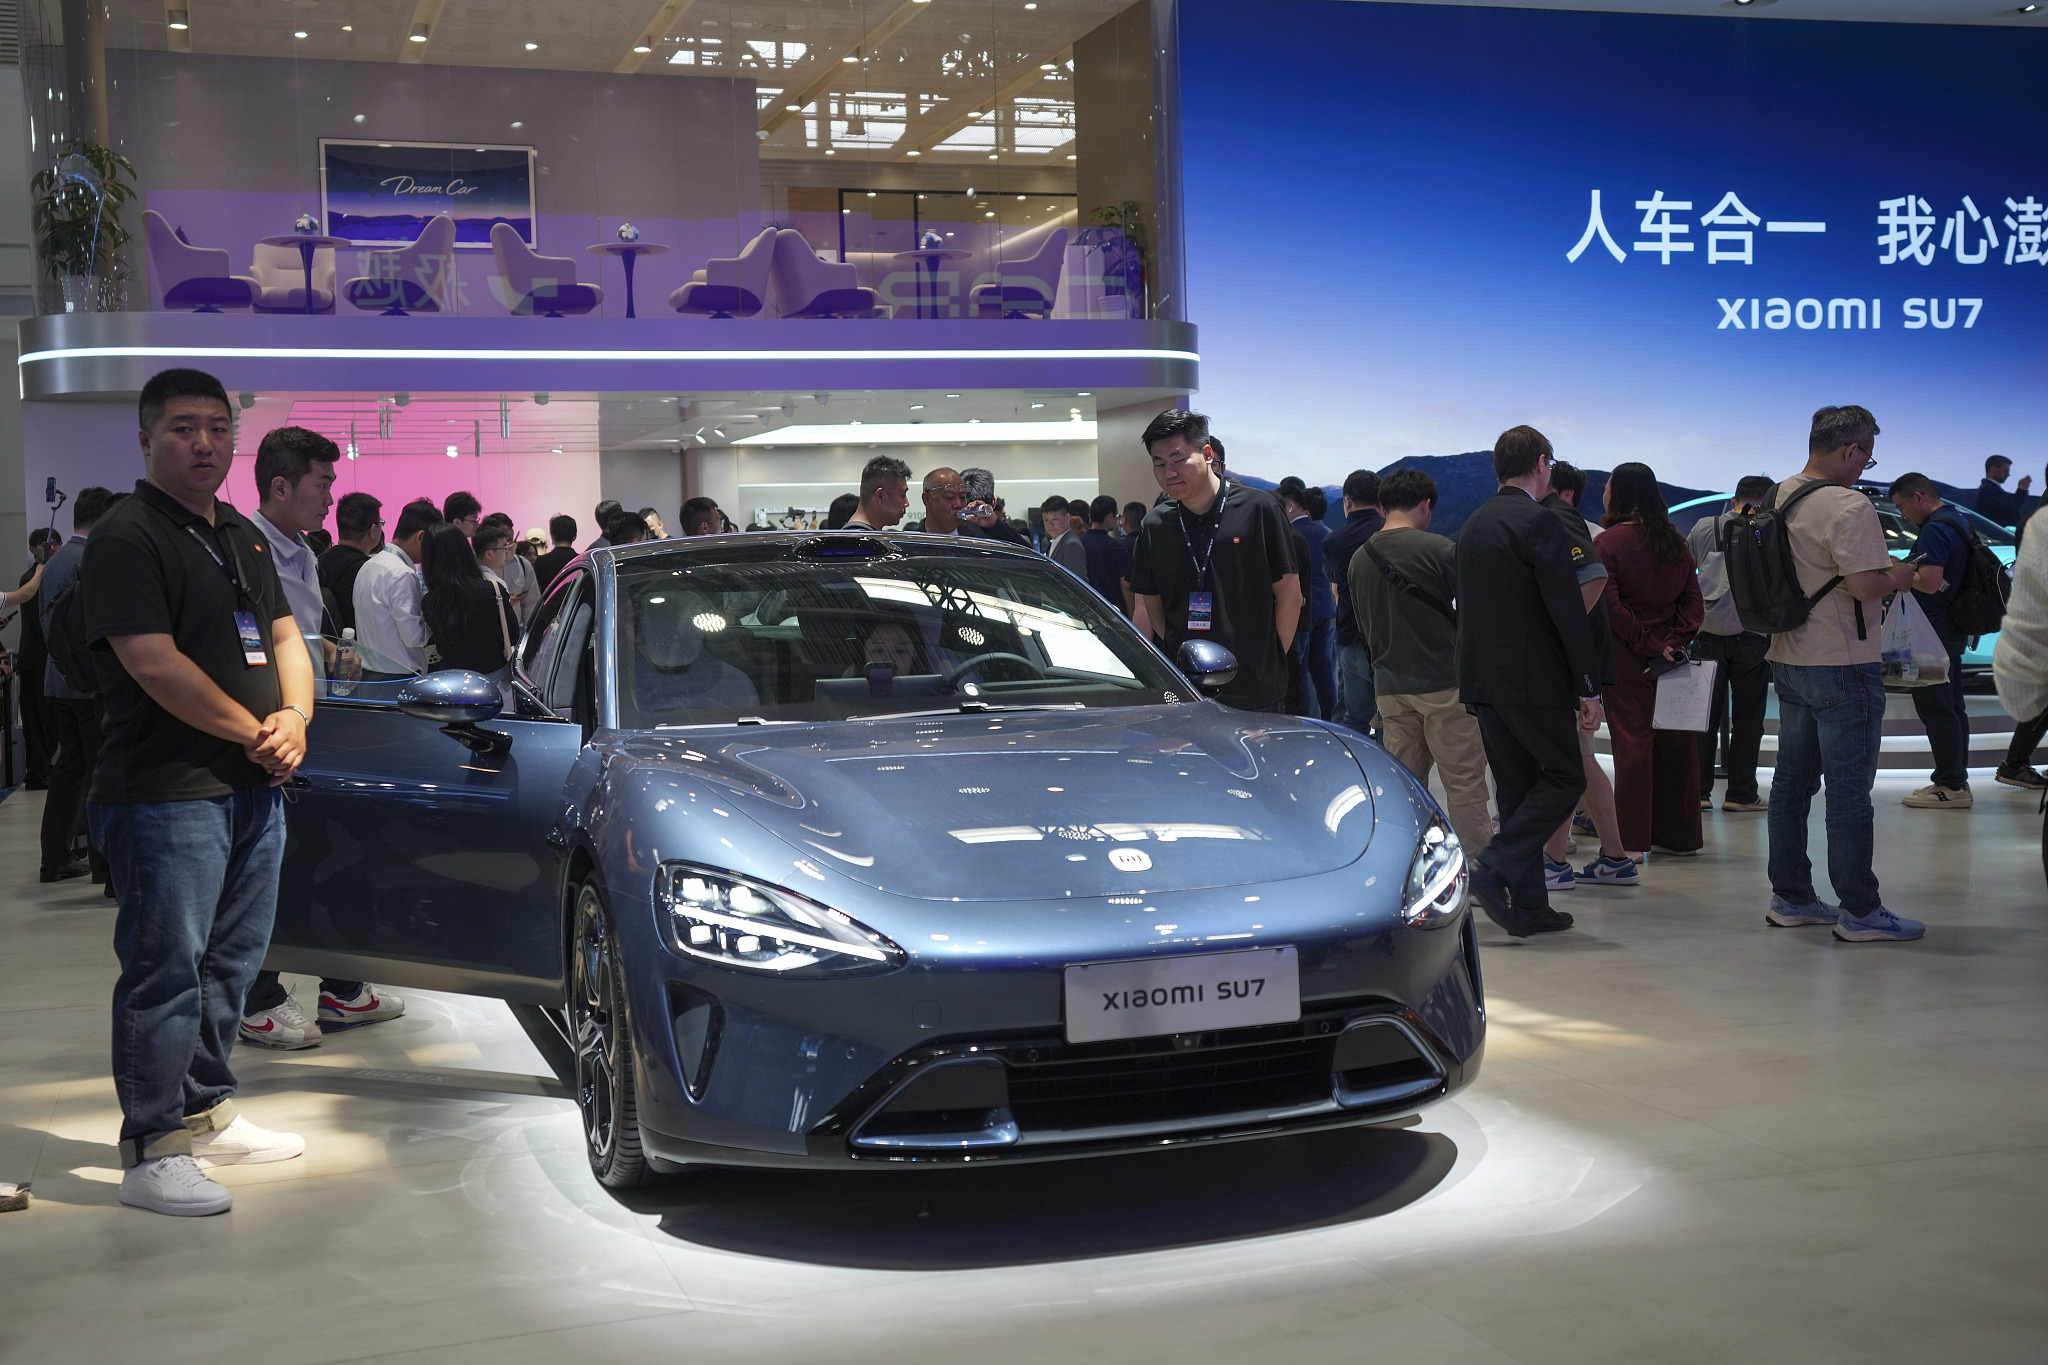 Show attendees inspecting the newly introduced Xiaomi SU7 sedan at Auto China 2024, Beijing, China, April 26, 2024. /CFP